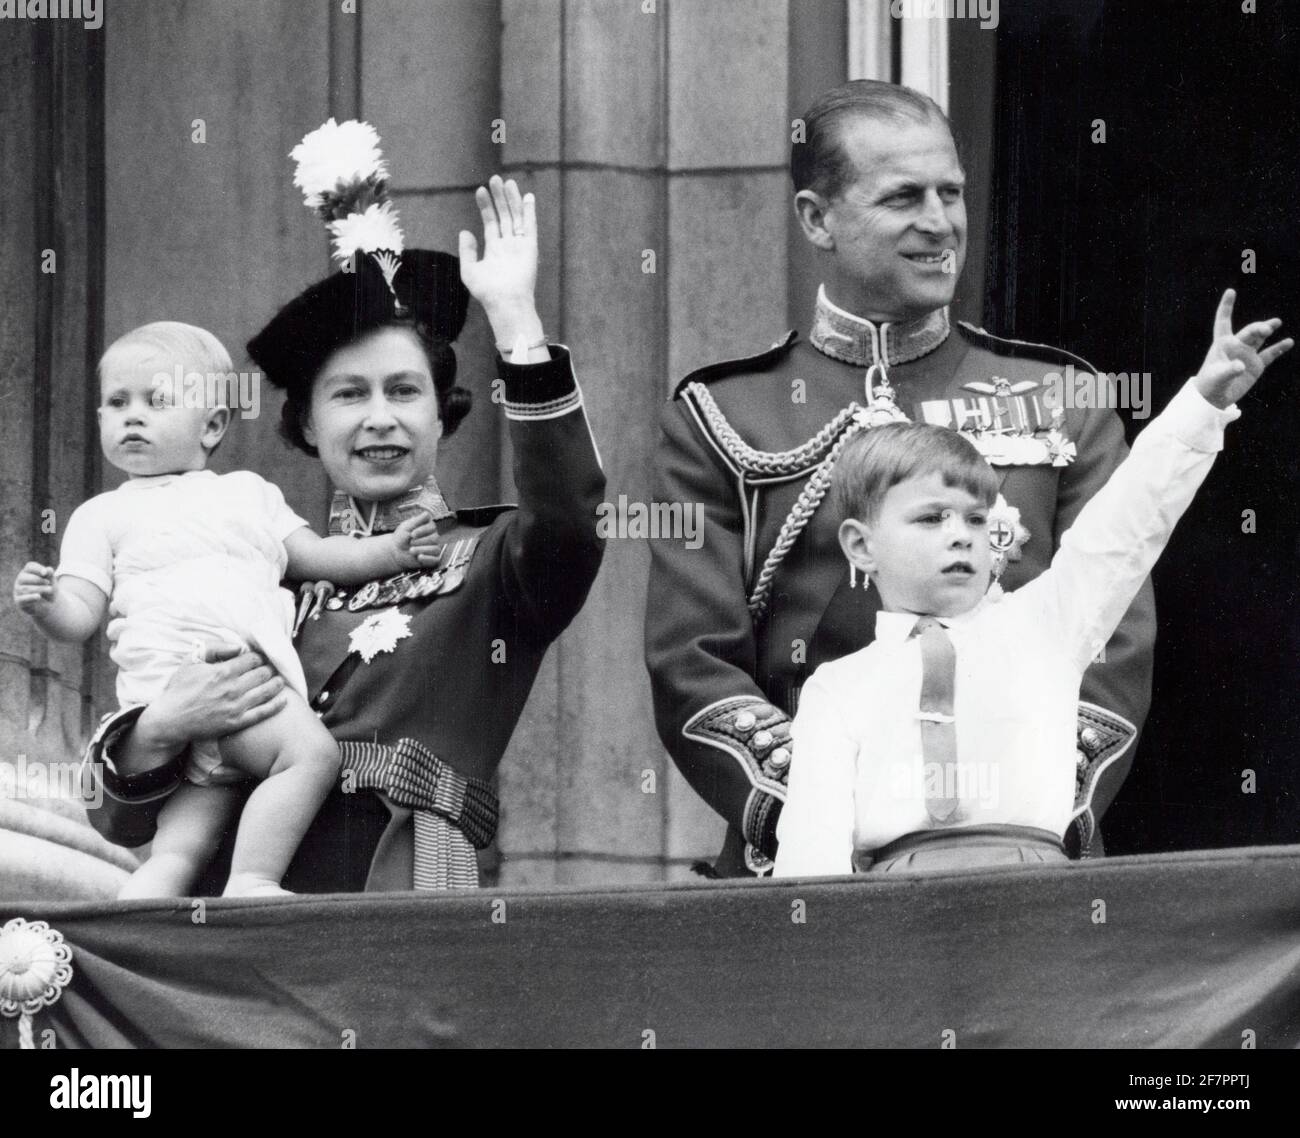 June 12, 1965 - London, England, U.K. - Daughter of King George VI and Queen Elizabeth, ELIZABETH WINDSOR ( Elizabeth II) became Queen at the age of 25, and has reigned through more than five decades, during a period of great social change. PICTURED: QUEEN ELIZABETH, PRINCE PHILIP, PRINCE EDWARD and PRINCE ANDREW on the day of Queen's Birthday. (Credit Image: © Keystone Press Agency/Keystone USA via ZUMAPRESS.com) Stock Photo